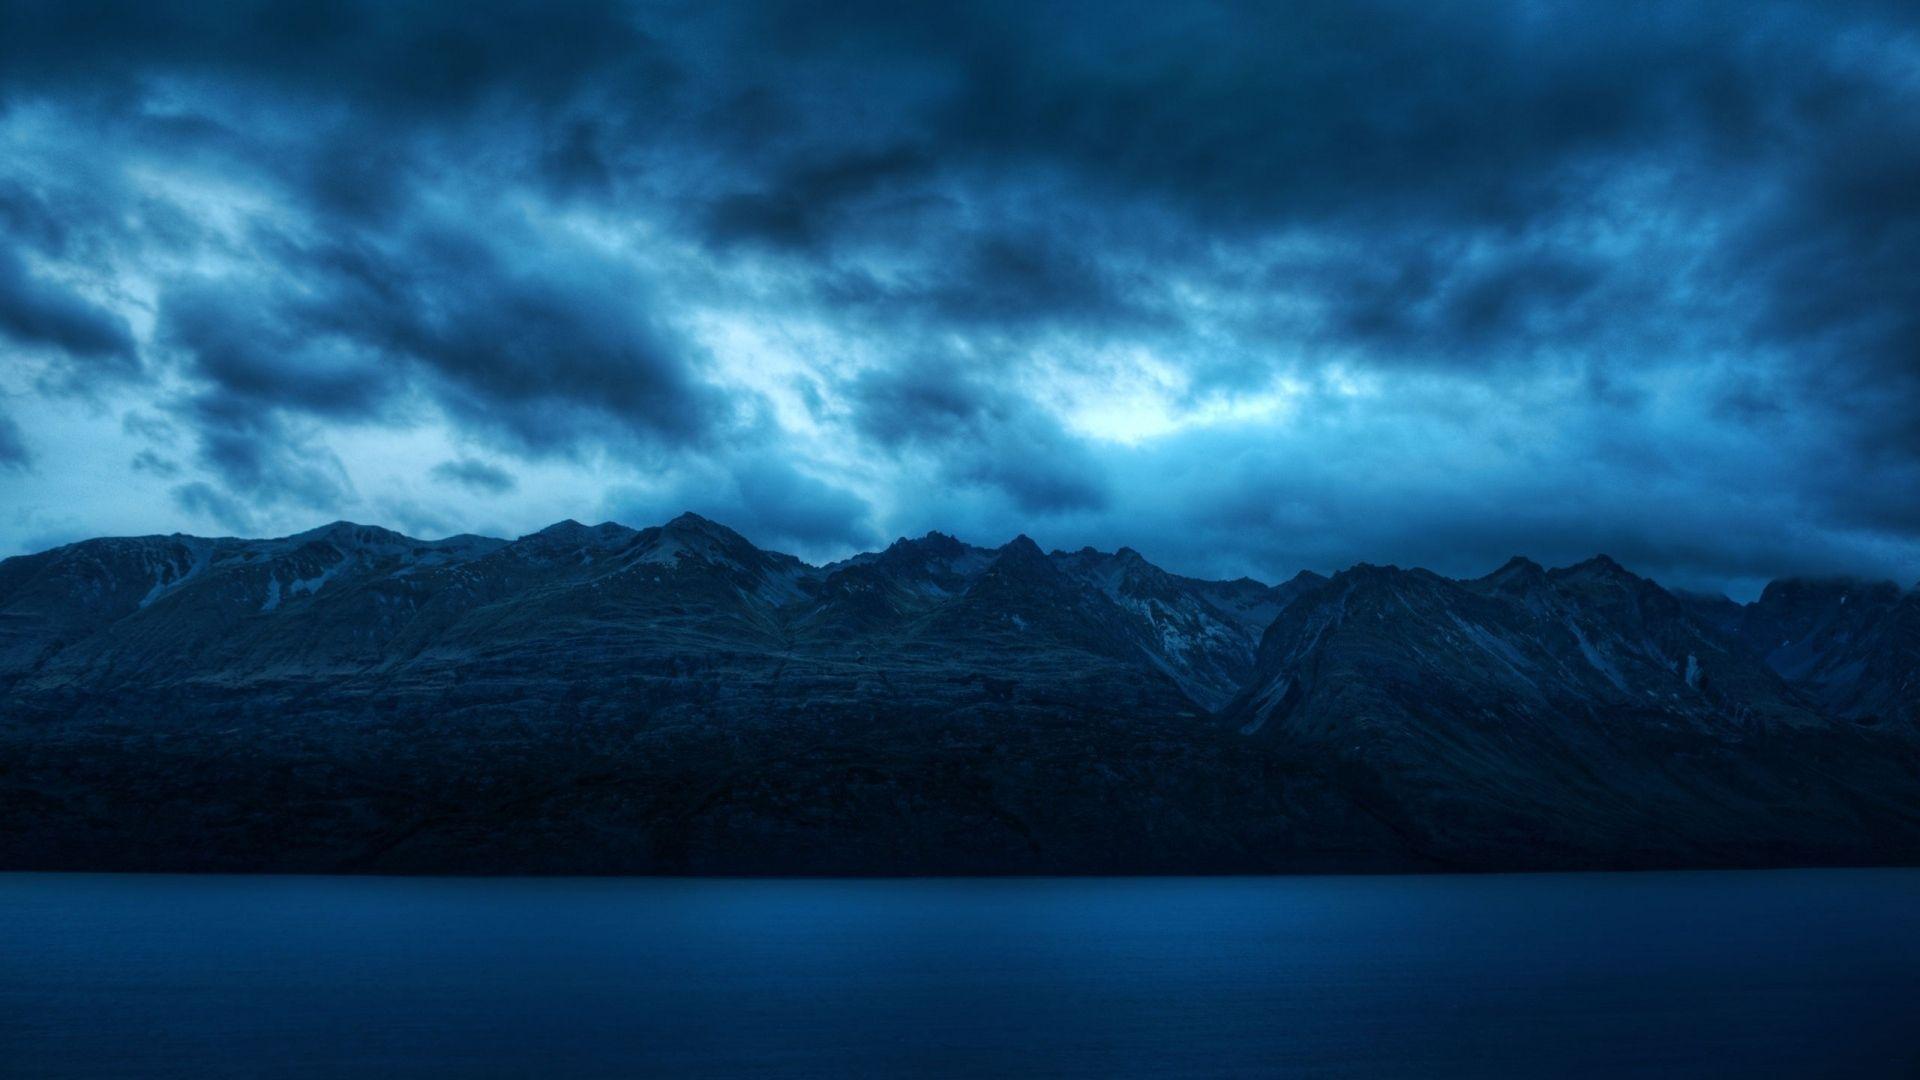 Download Wallpaper 1920x1080 water, blue, mountains, scenery, clouds